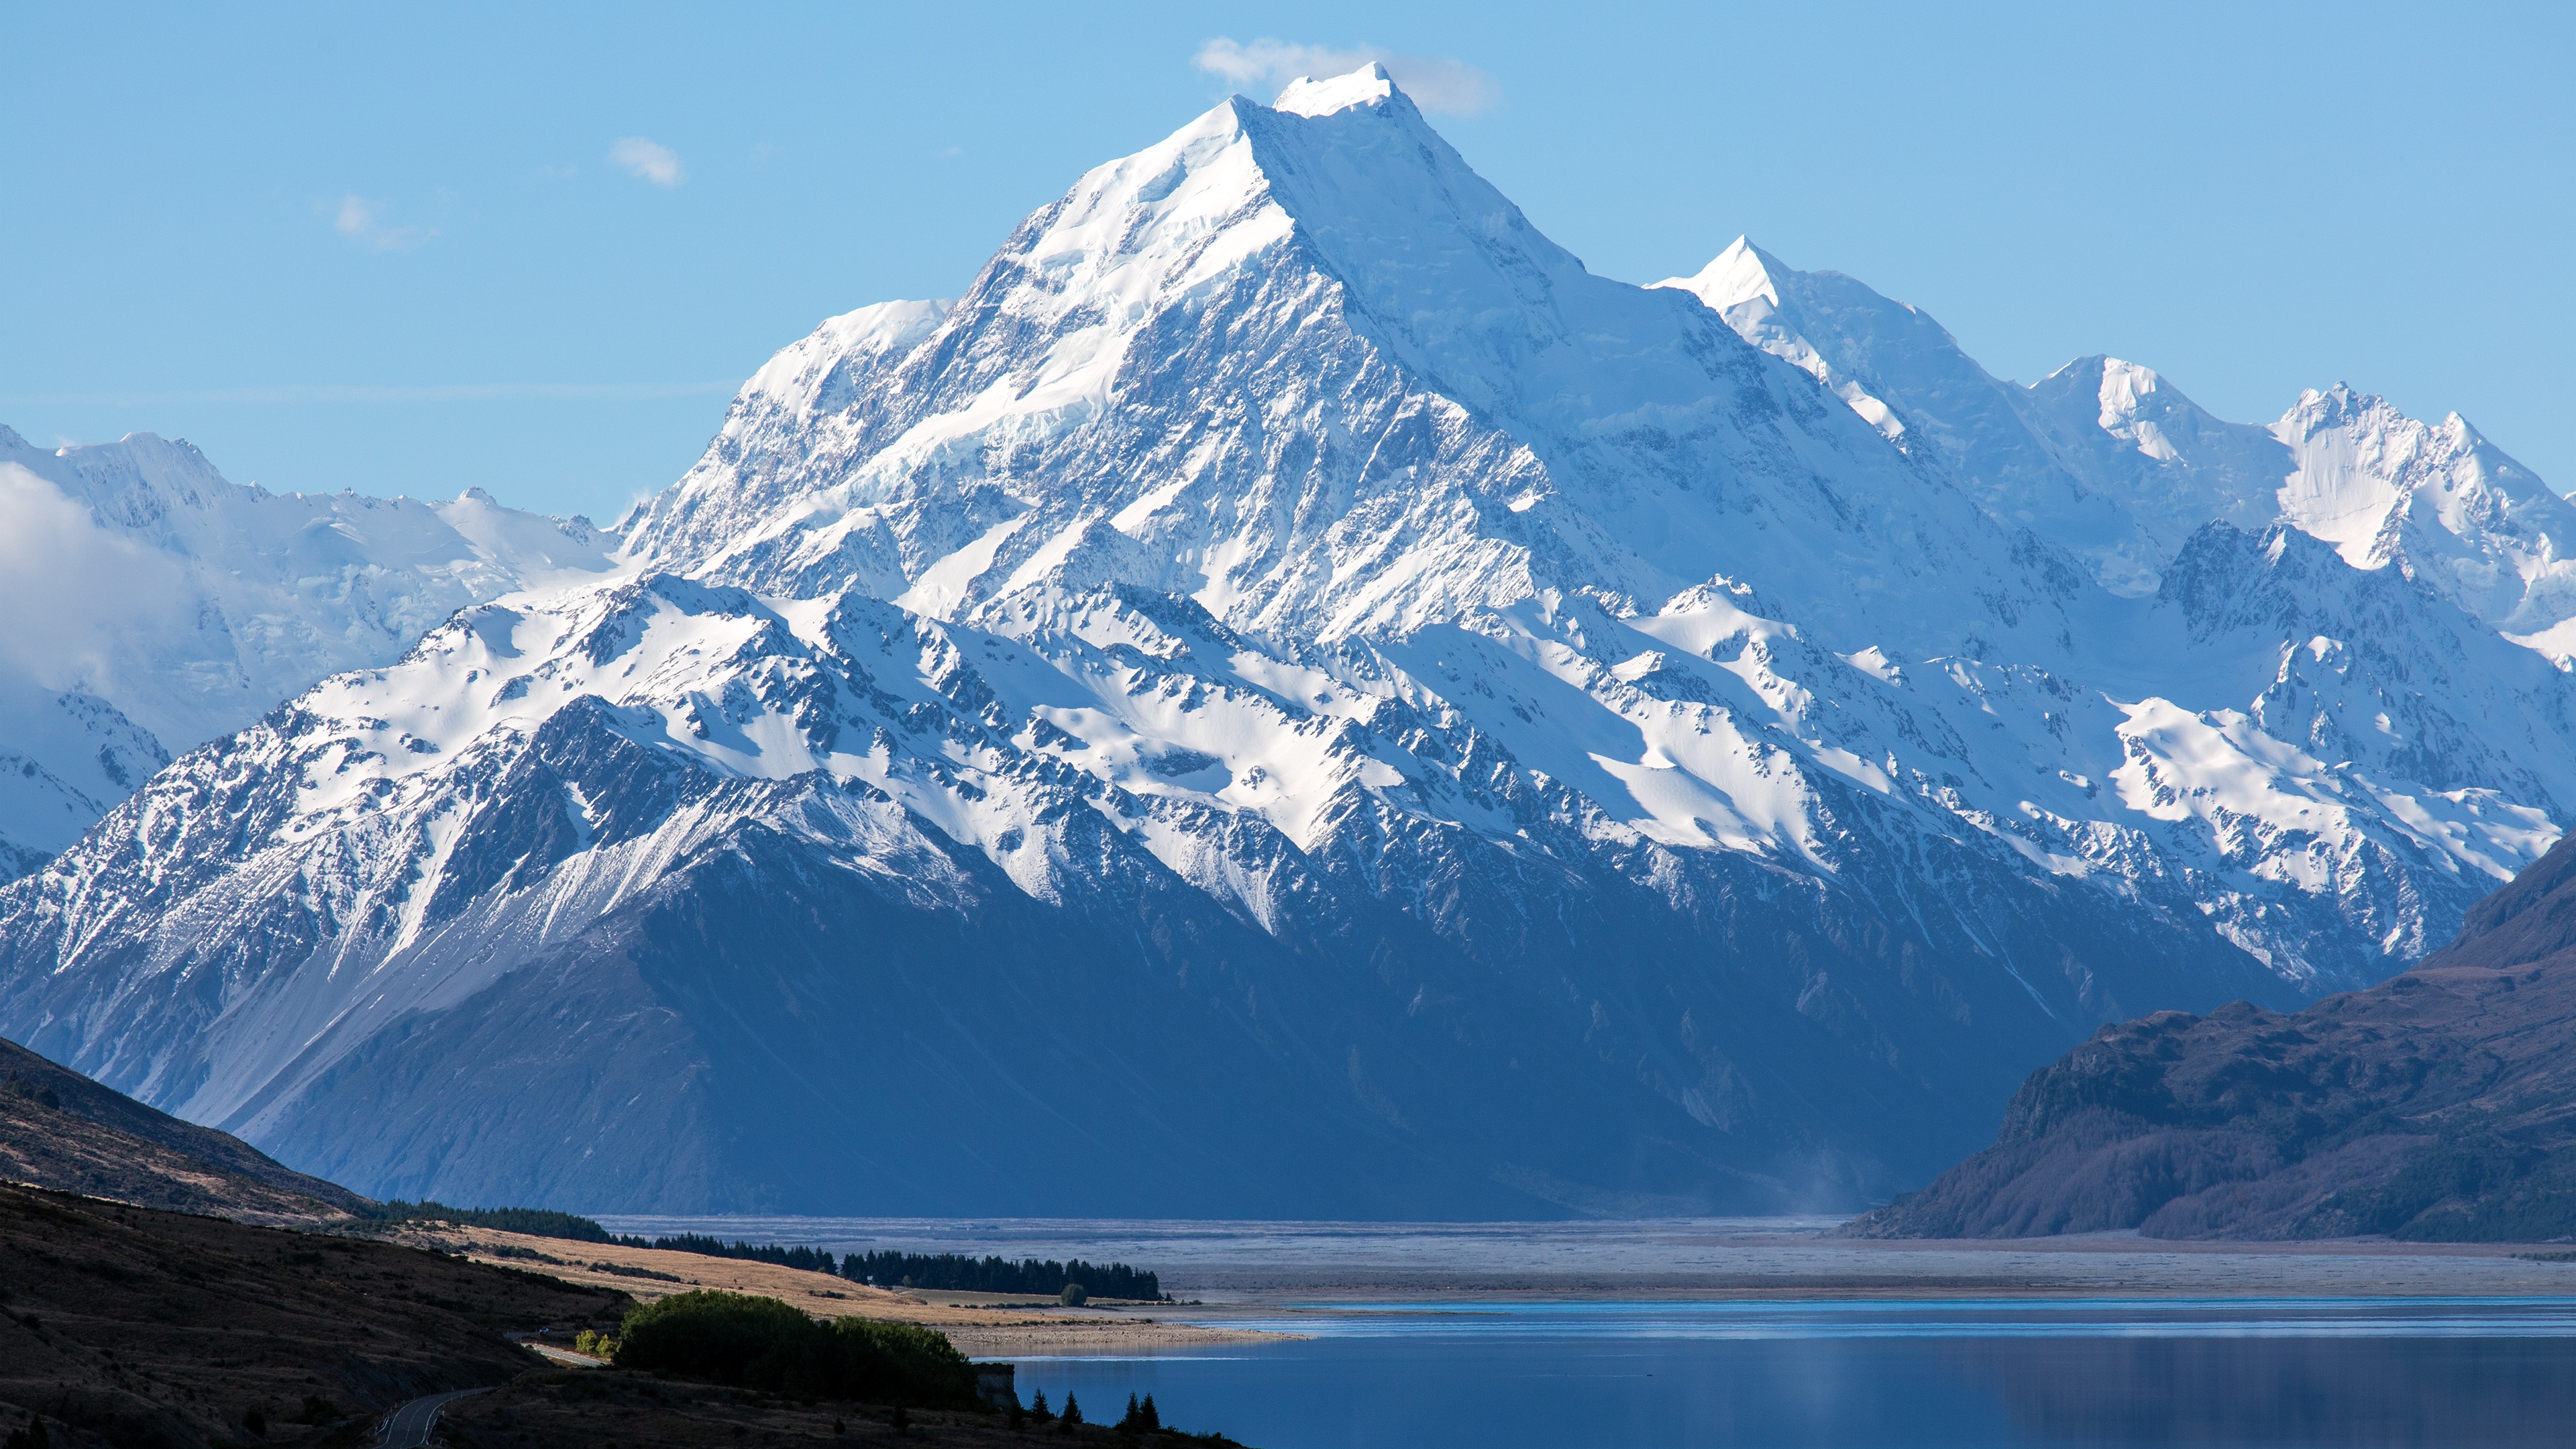 General 3840x2160 mountains nature landscape river Mount Cook New Zealand